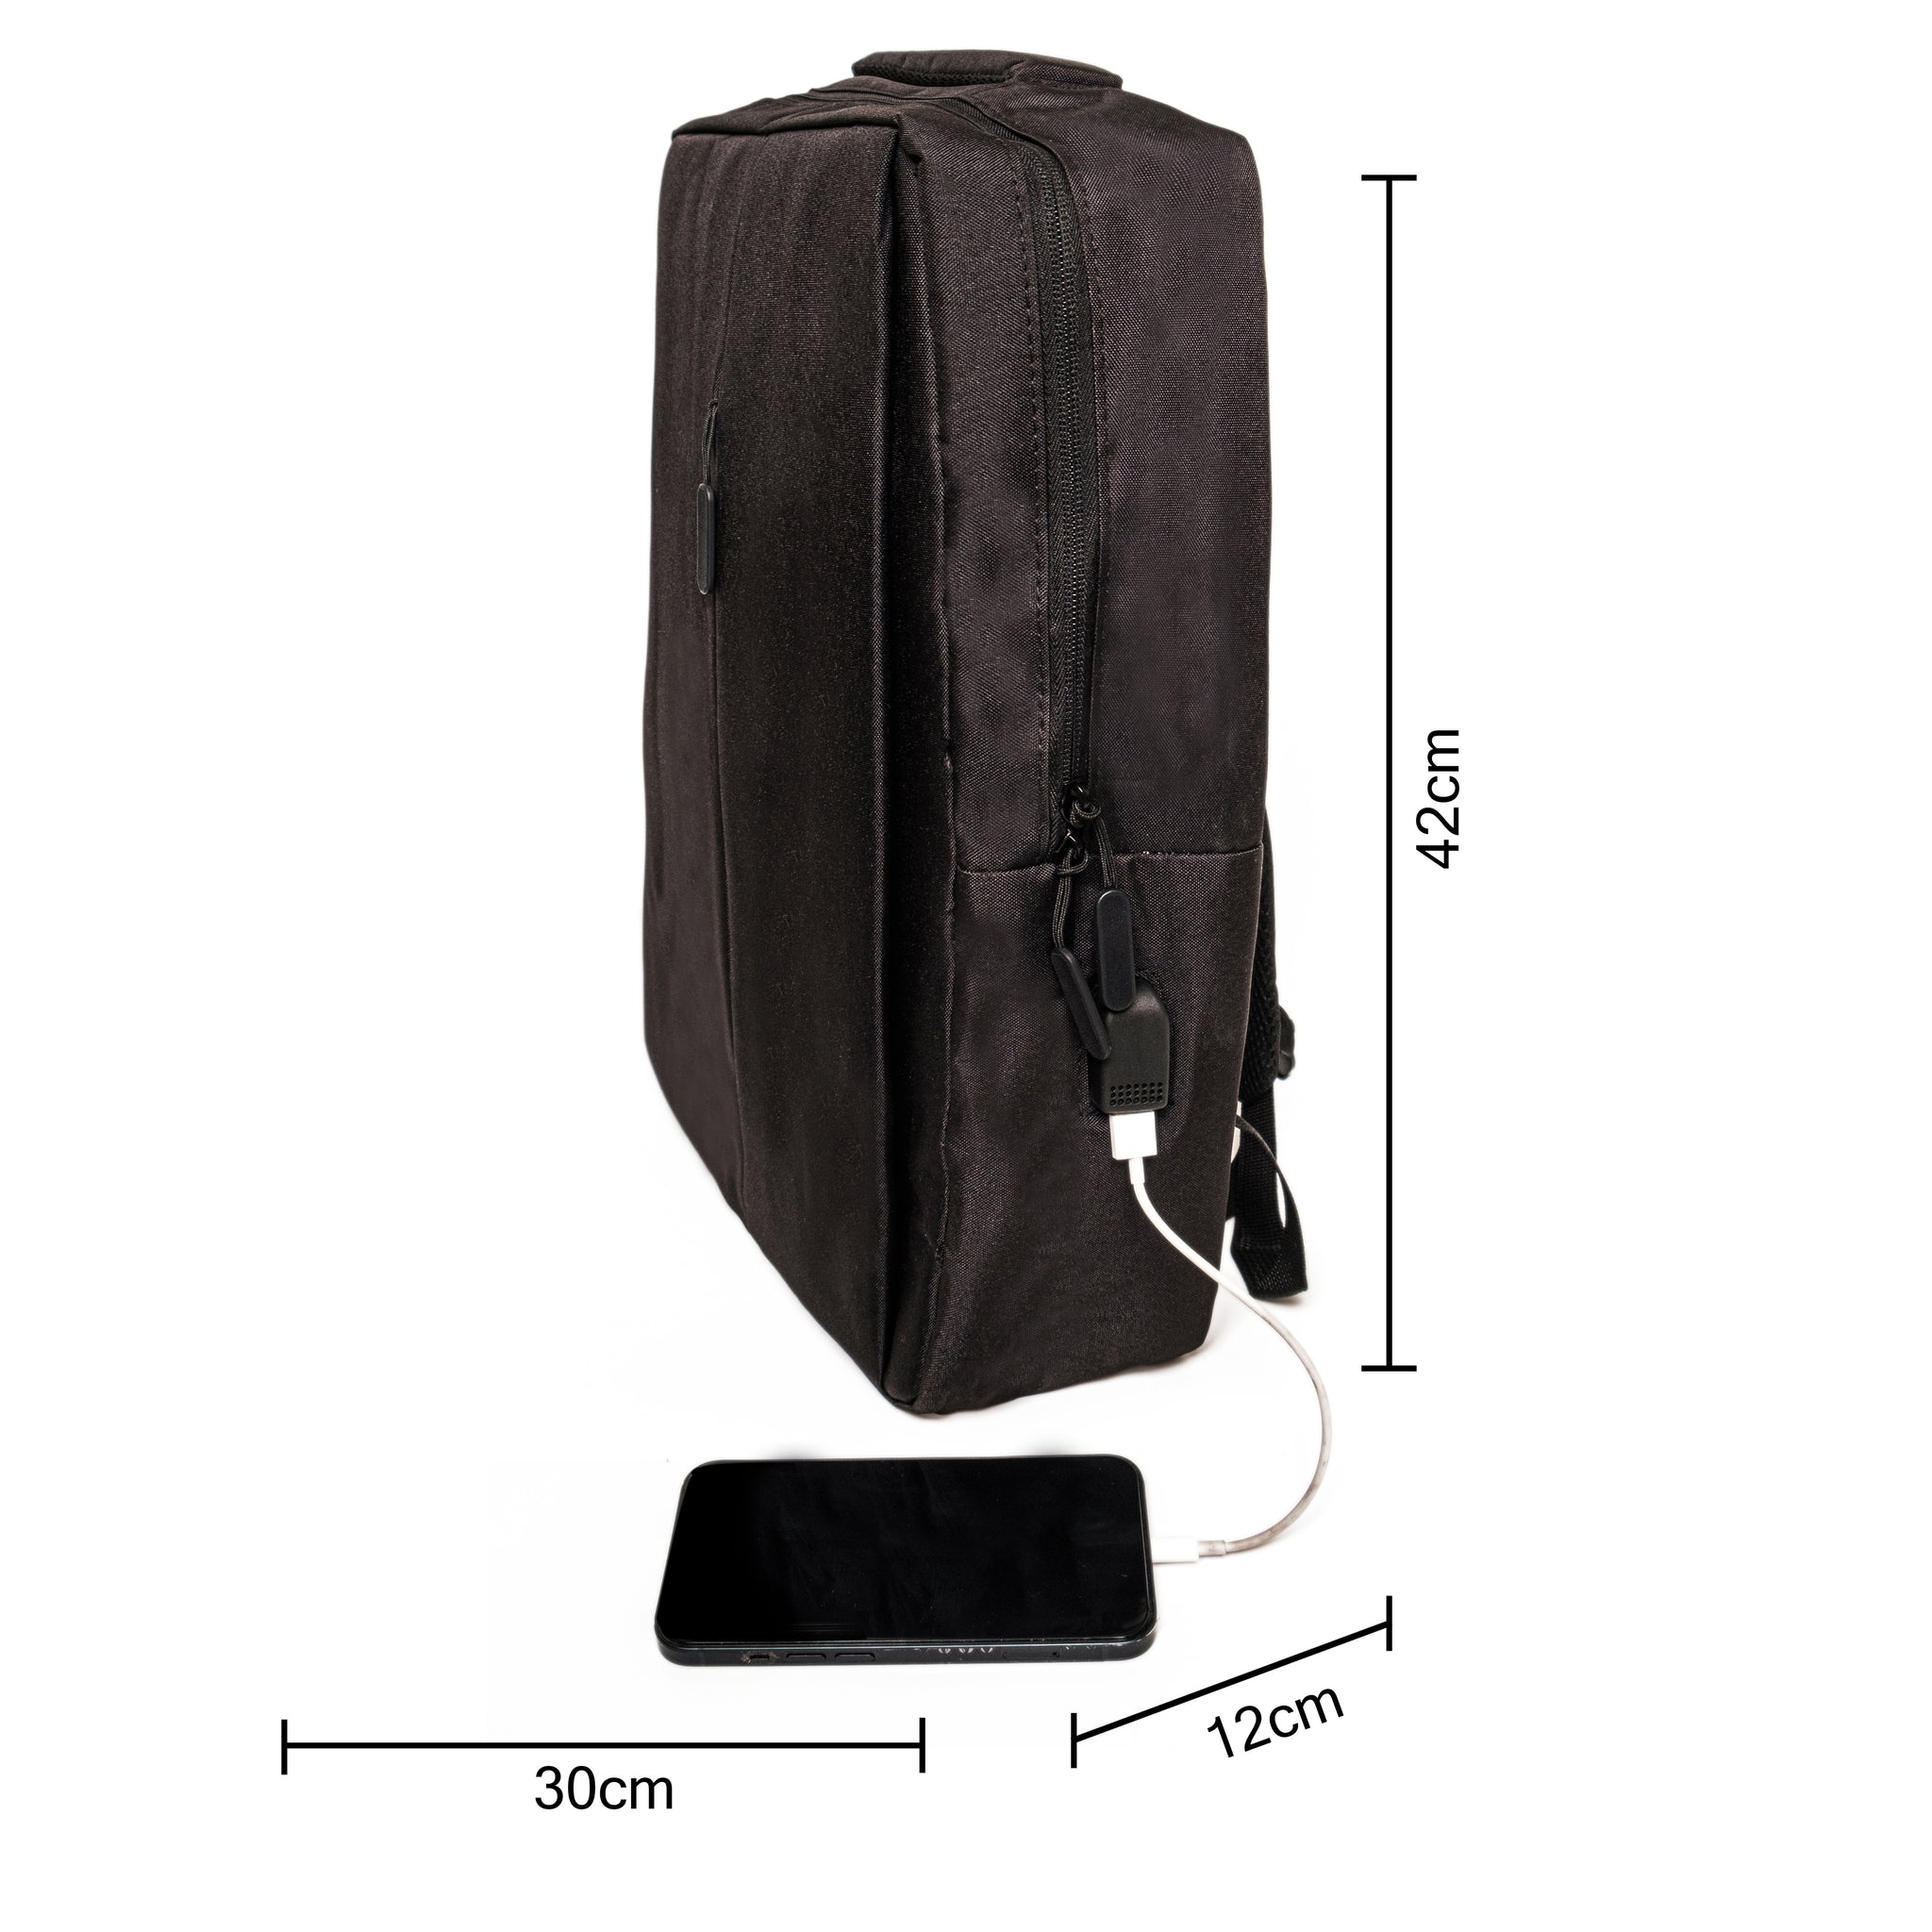 Chokore Travel Backpack with USB Port